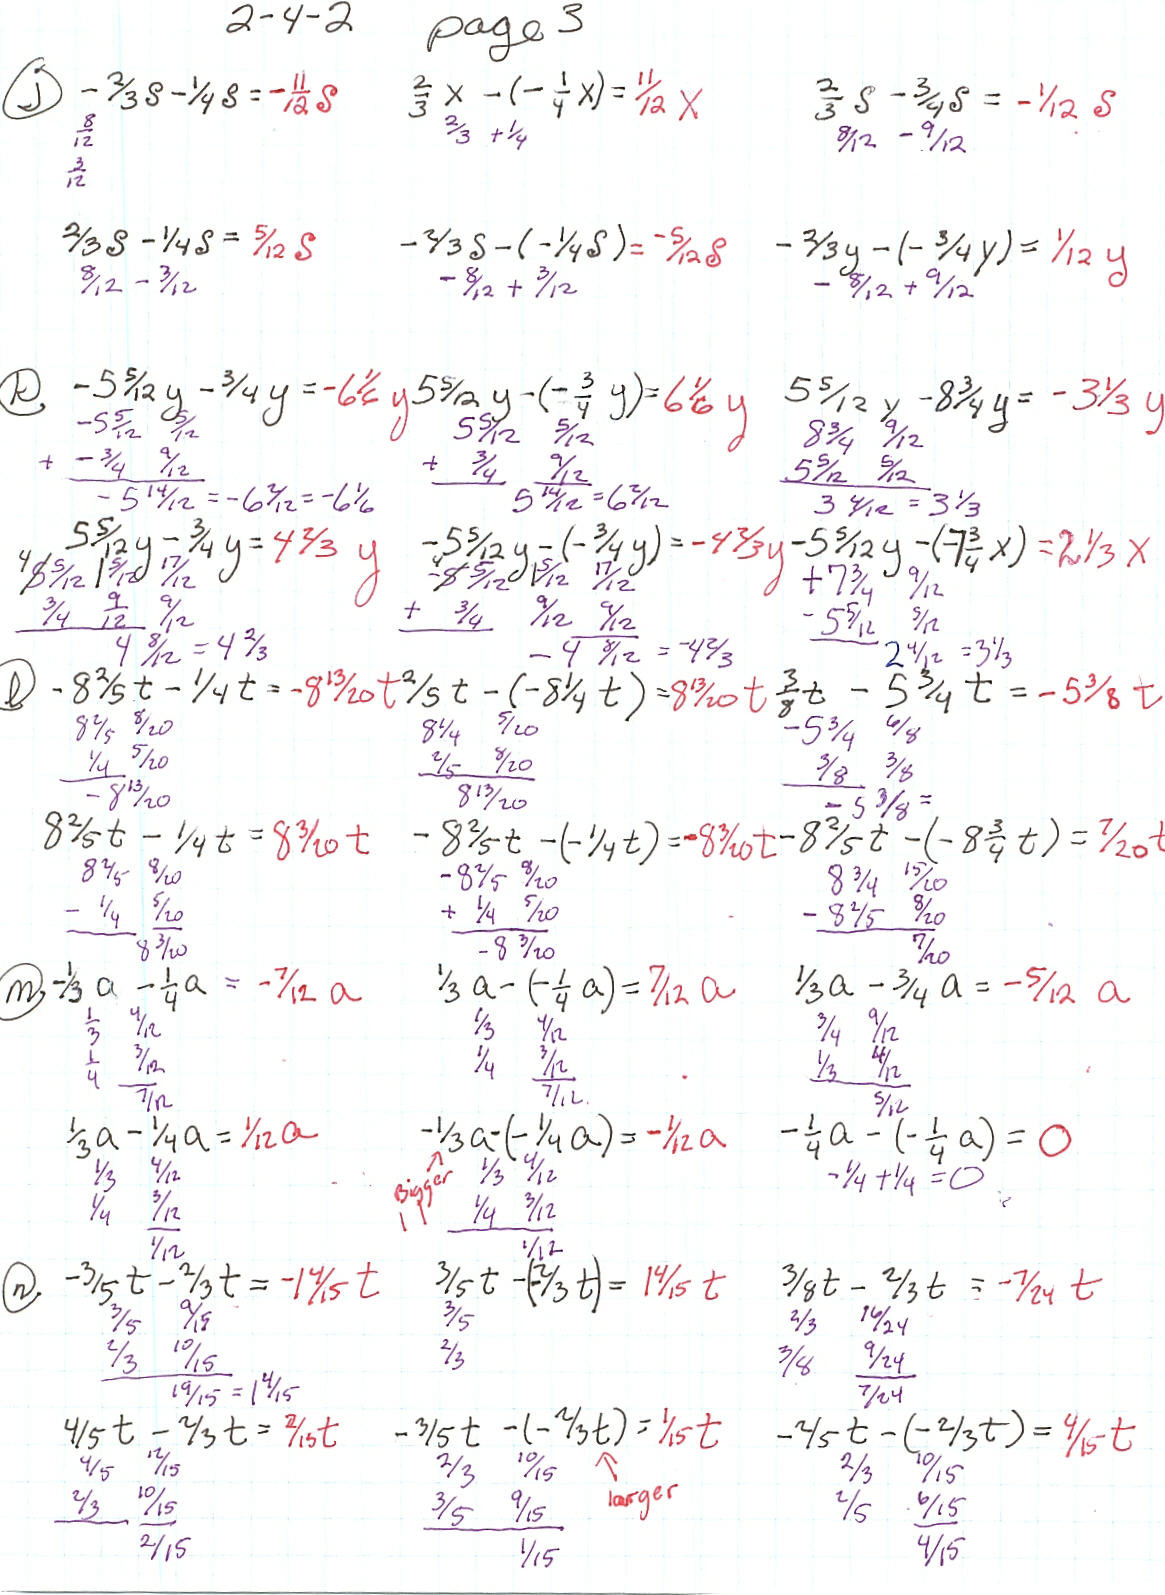 Solving With The Quadratic Formula Worksheet Answers